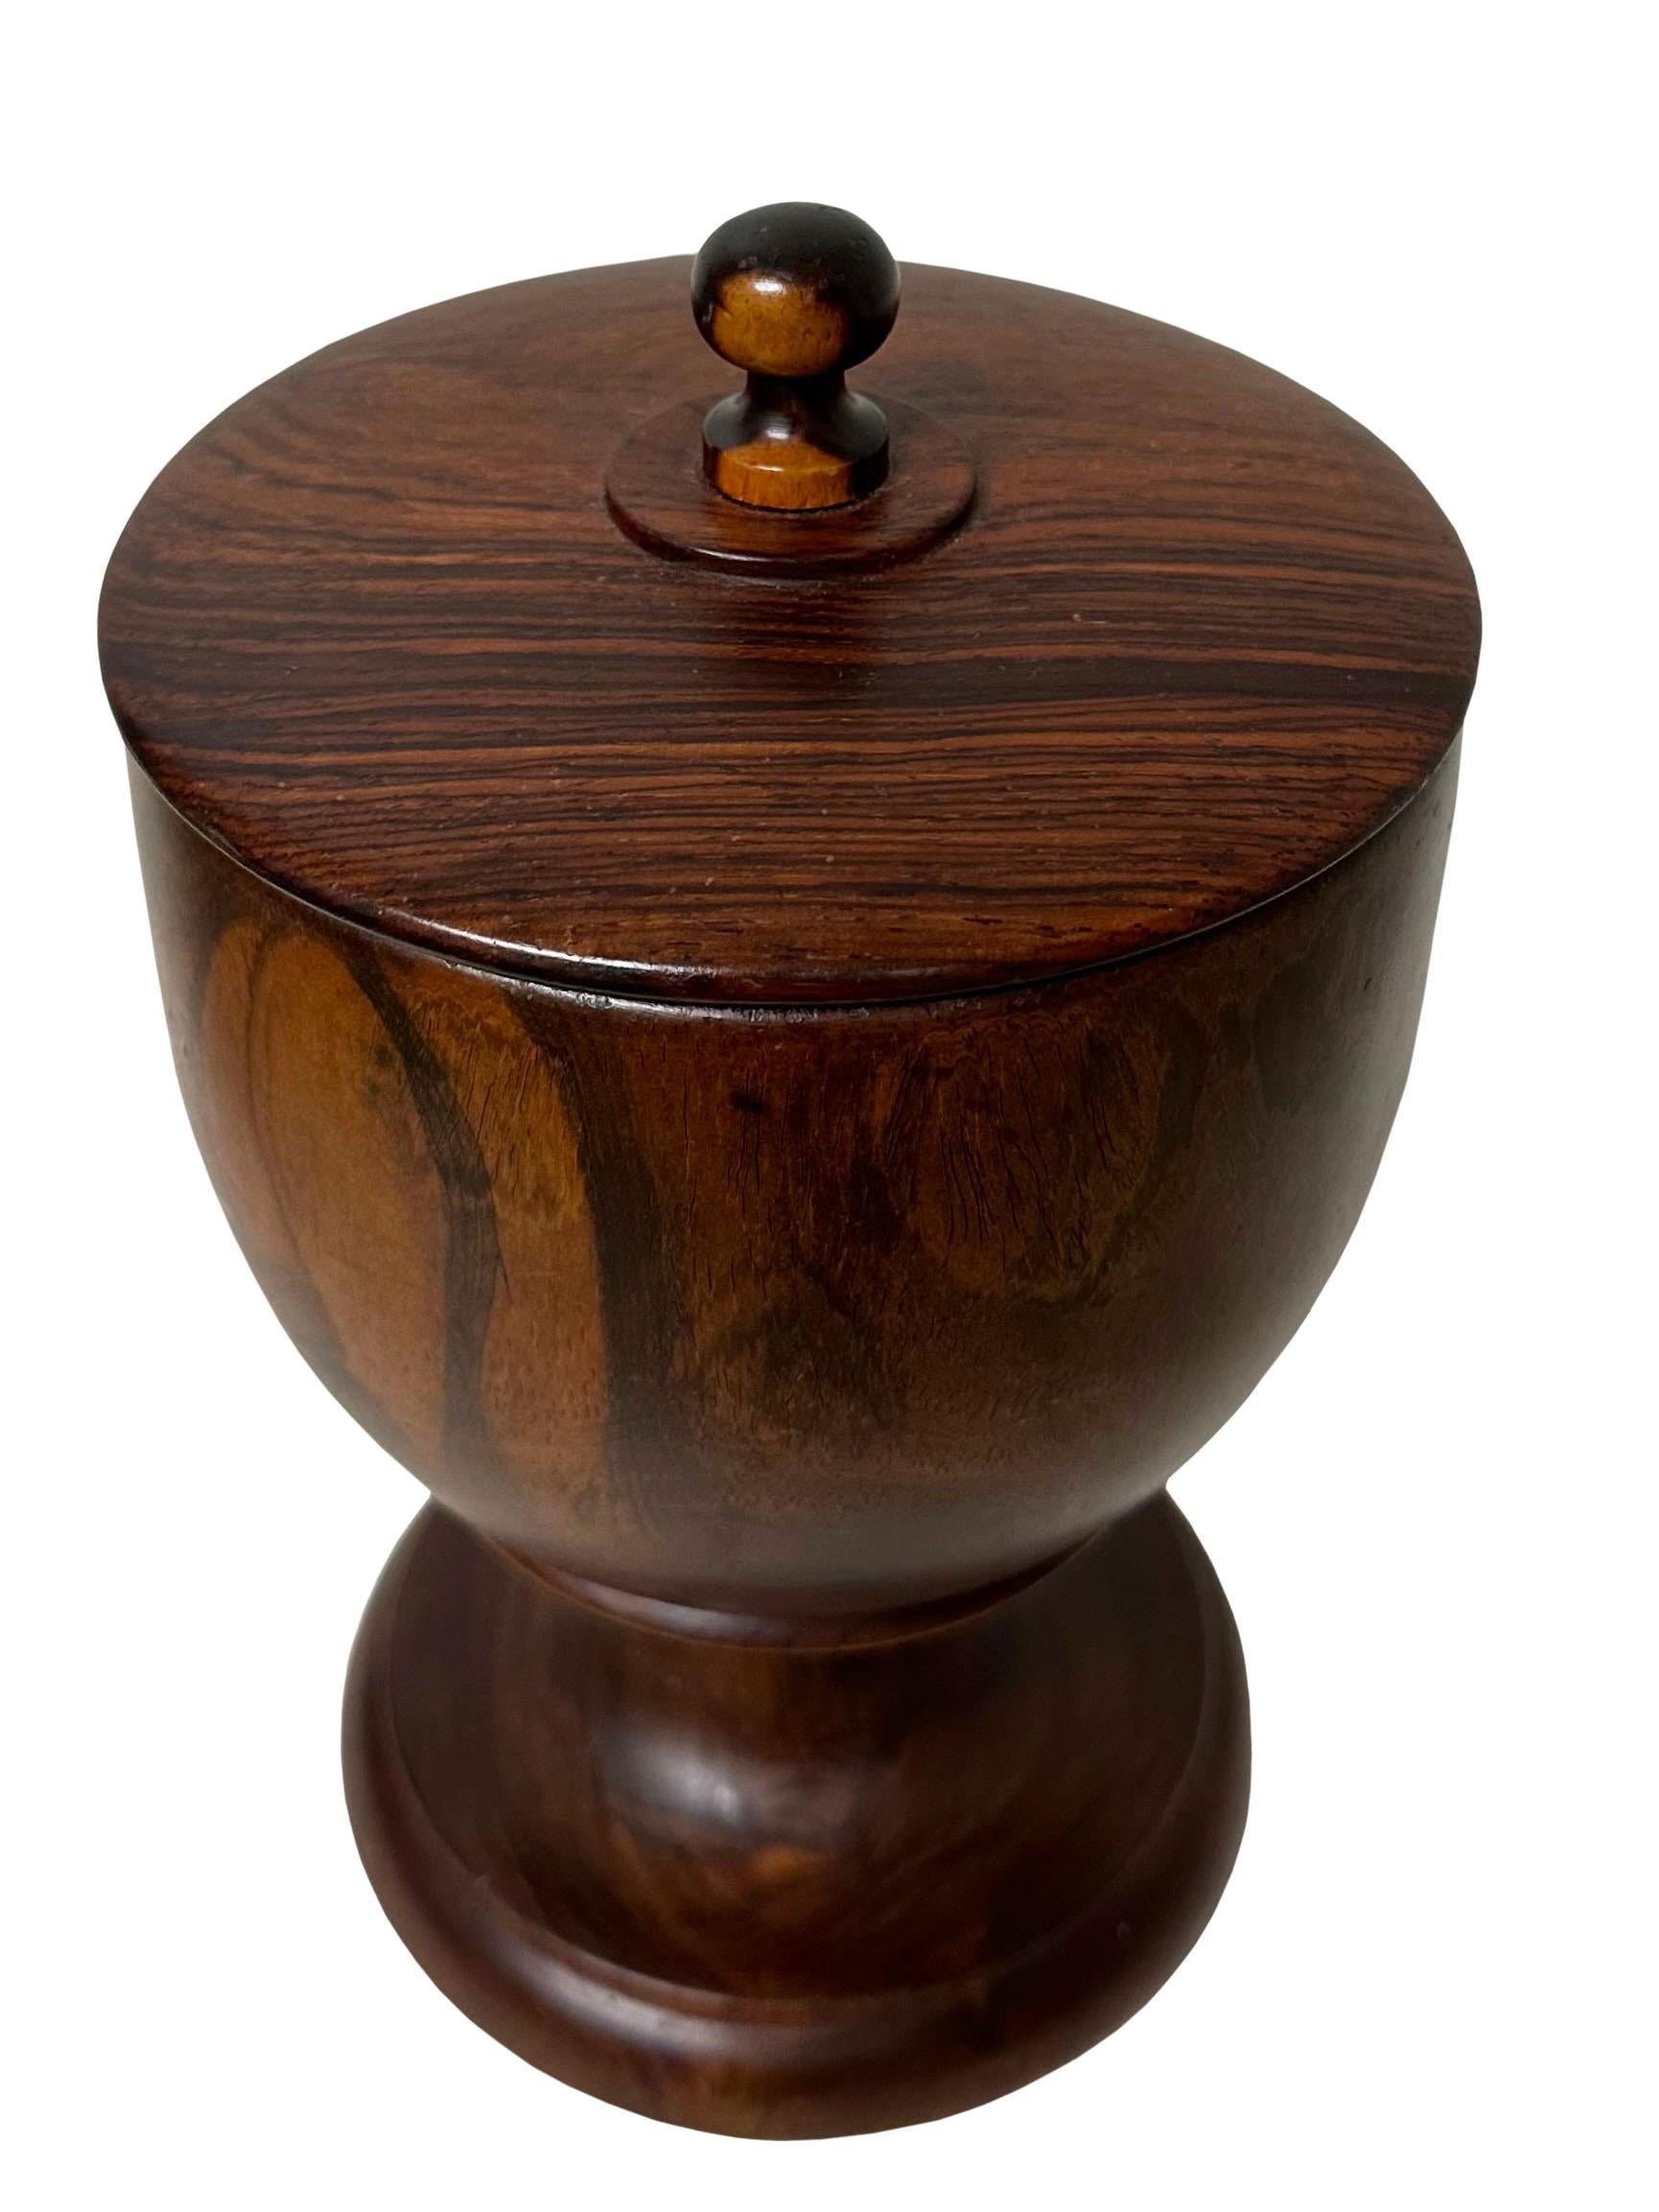 A 19th century English rosewood tobacco jar. This has been beautifully refinished along time ago and whoever did it, did a nice job. Possibly could be Irish but assuming English.